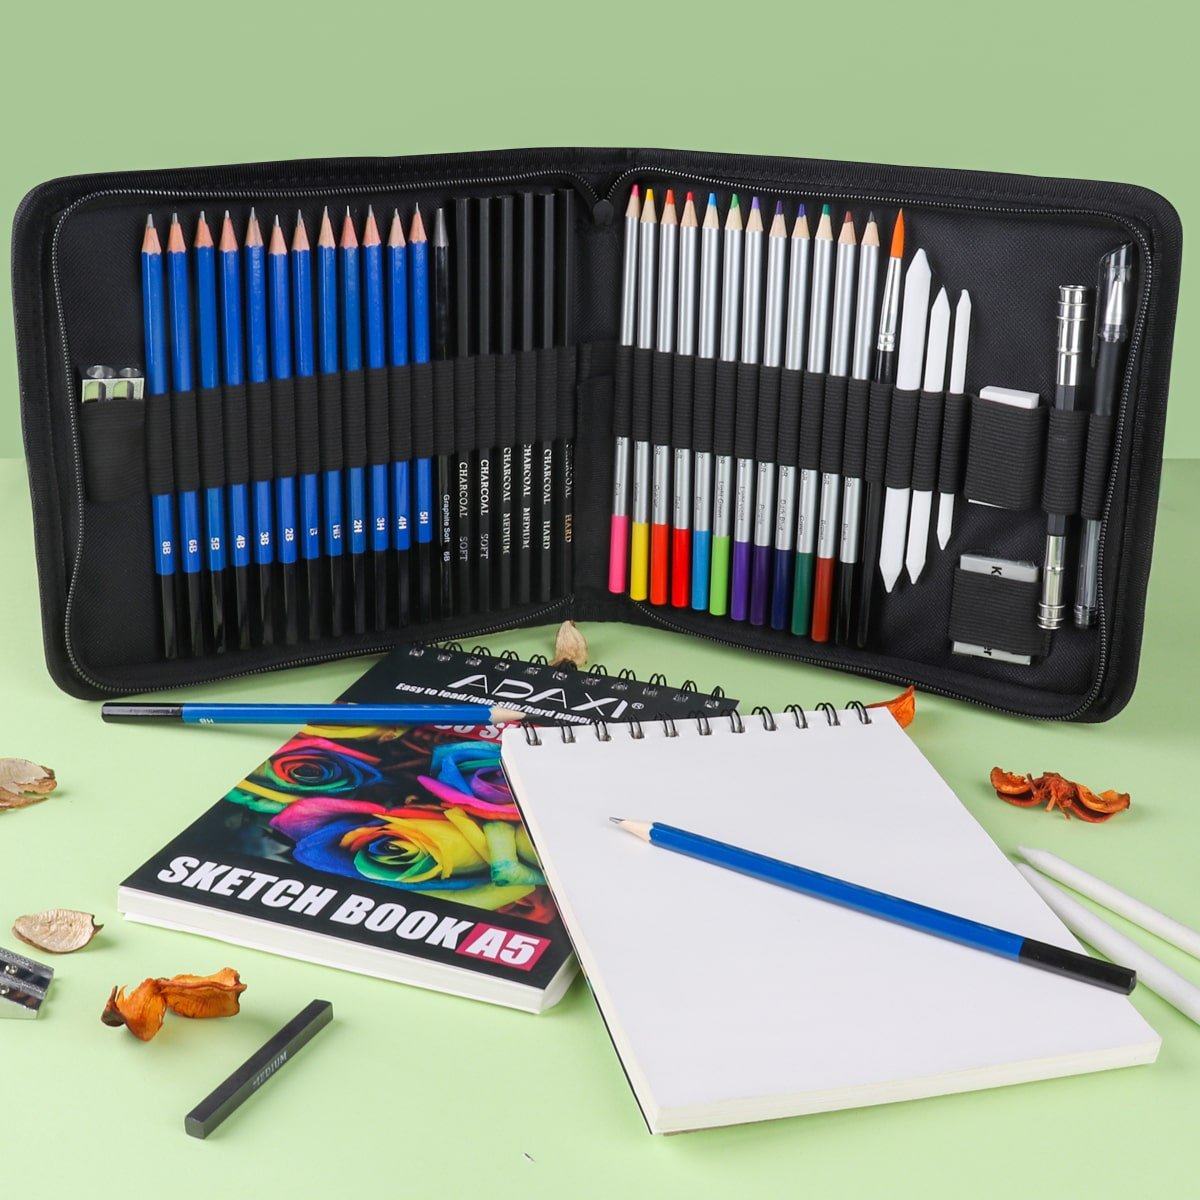 35 Pieces Professional Drawing Pencils and Sketch Kit